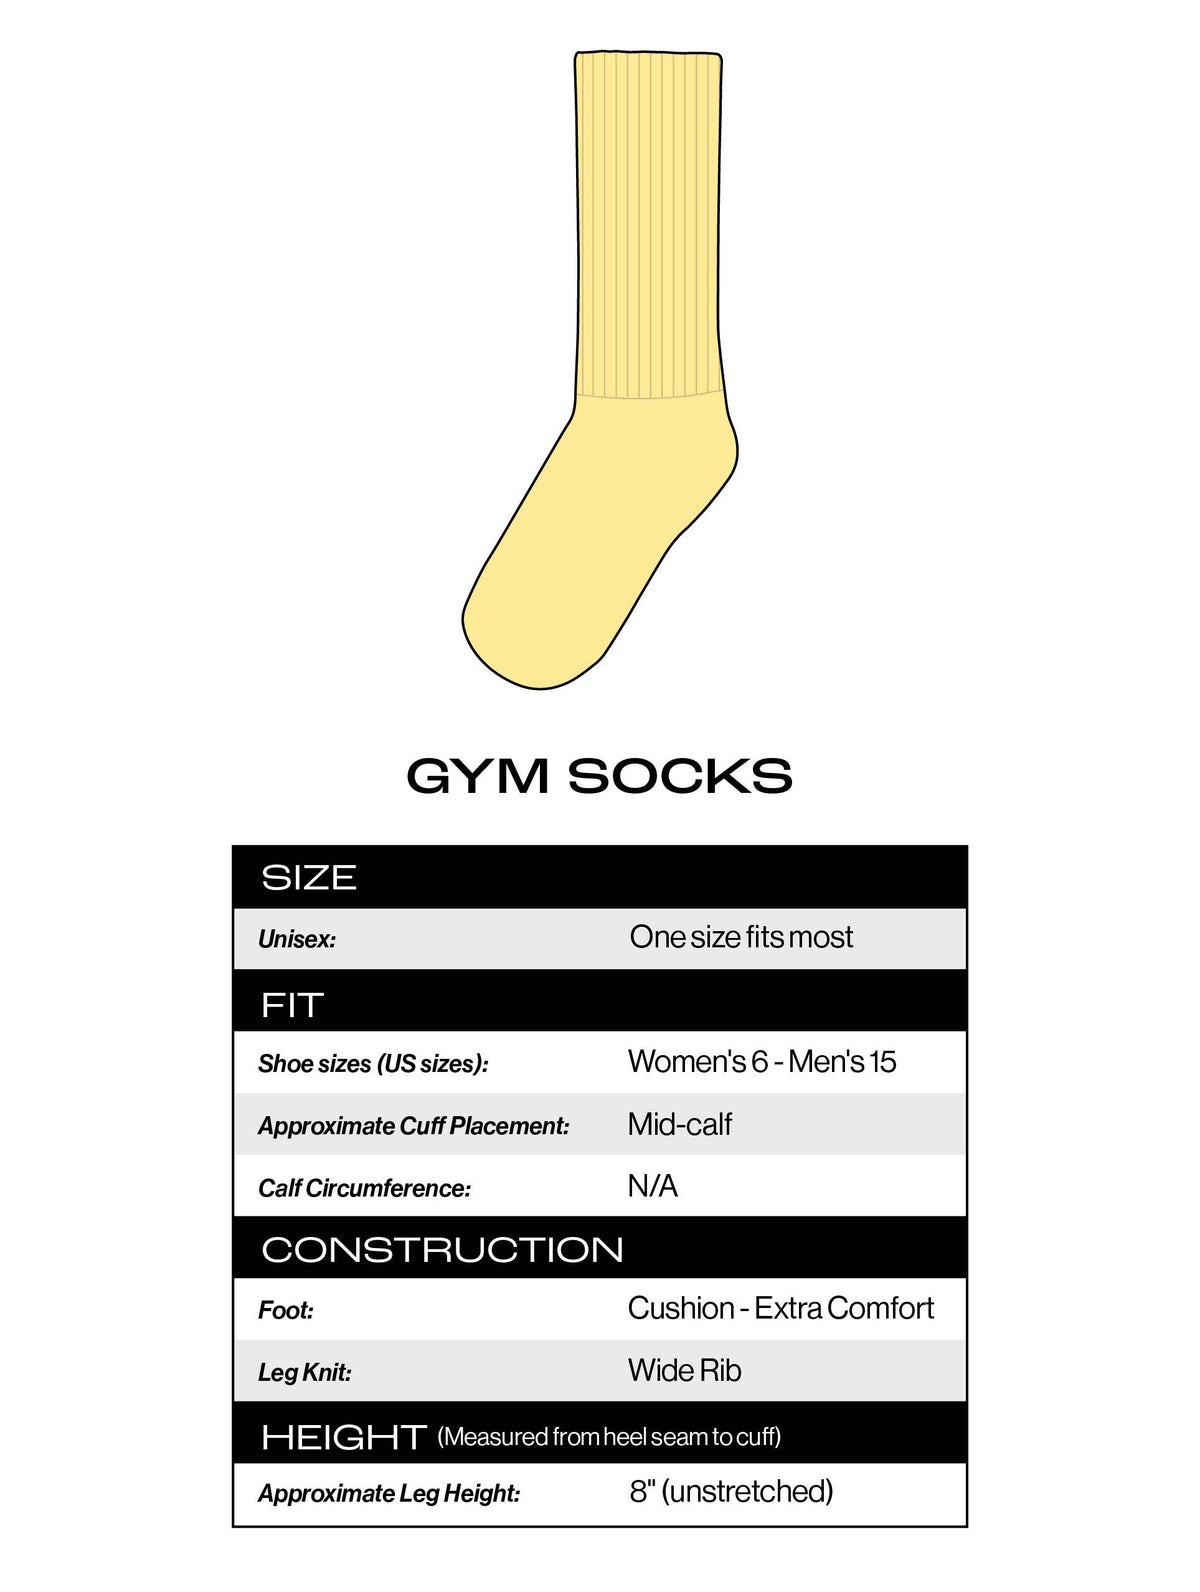 Gumball Poodle - Chicken Nuggets Gym Crew Socks